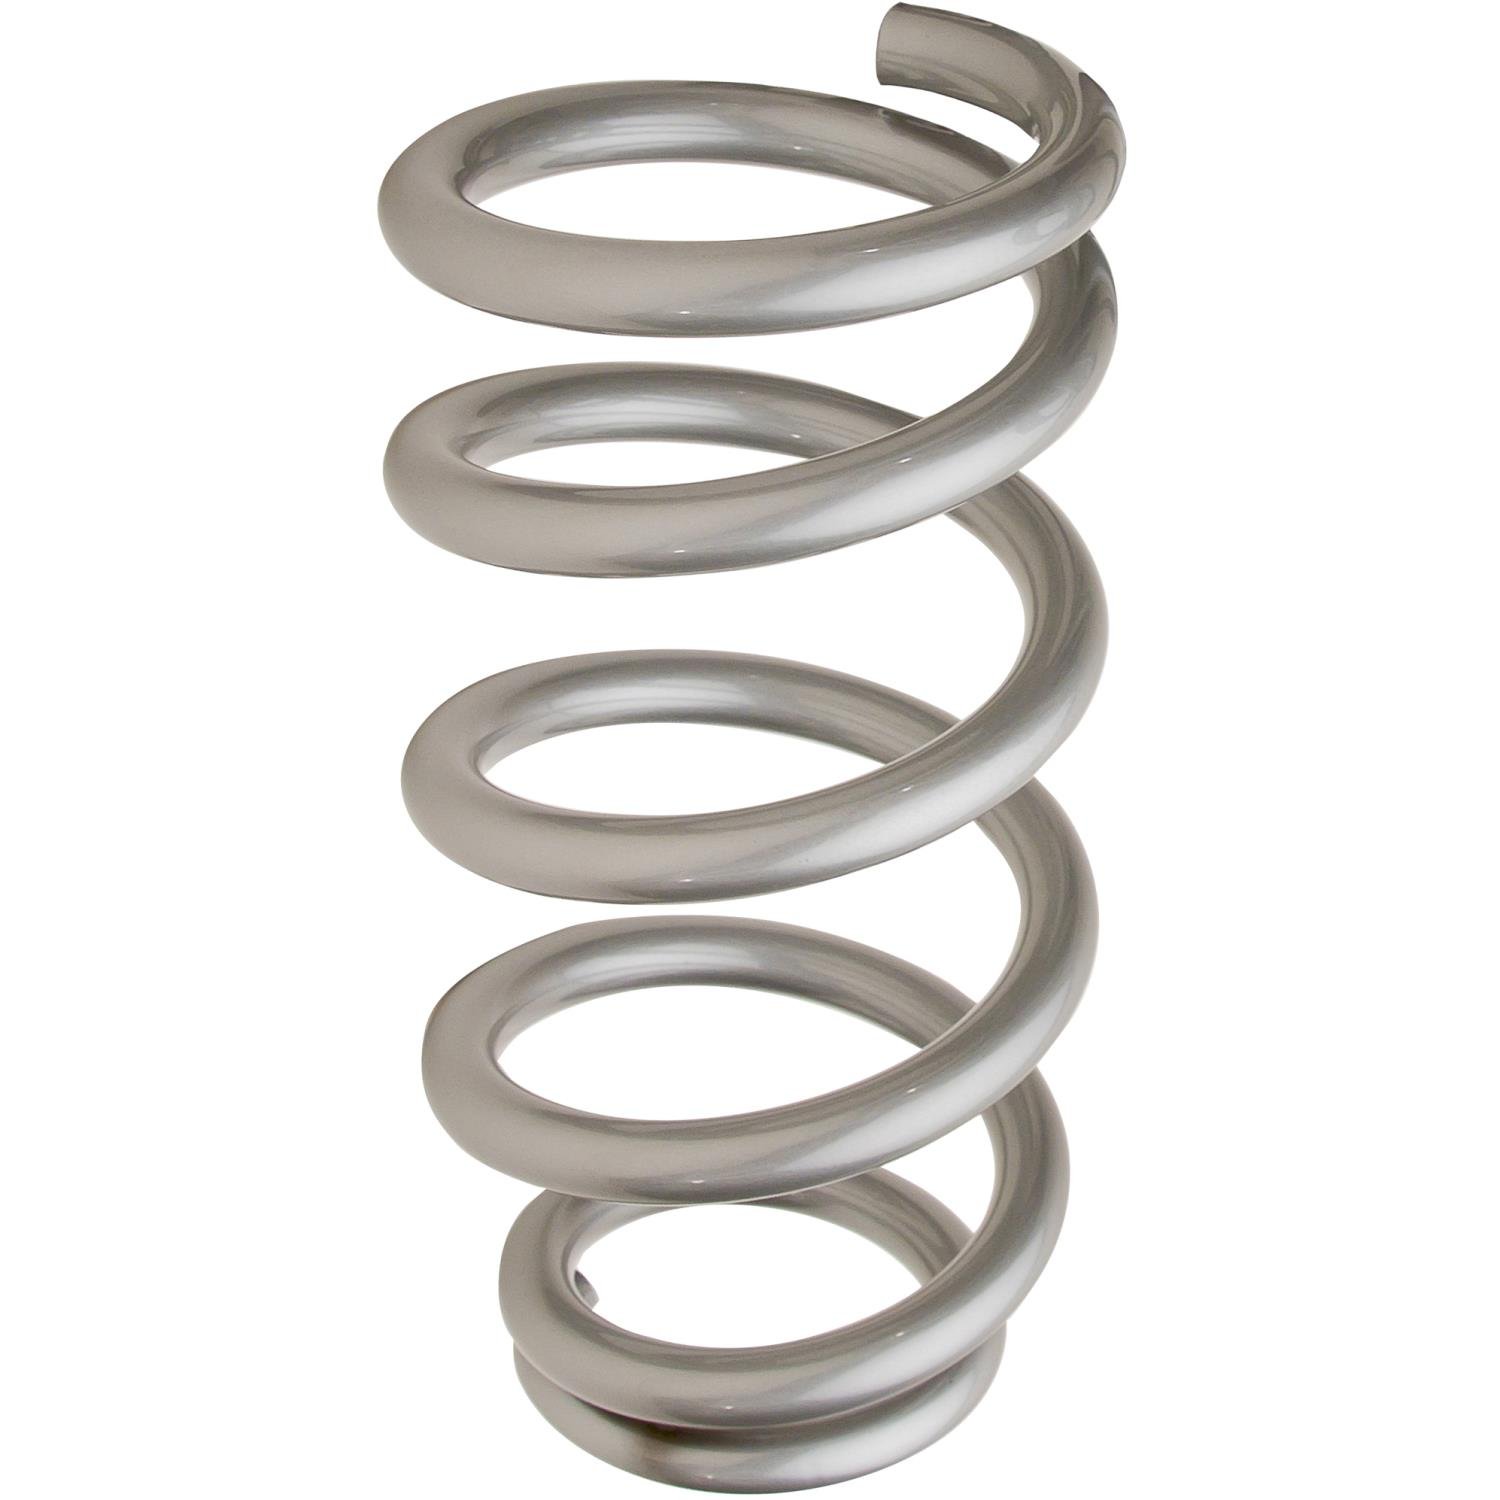 GM Style Flat & Ground High-Tensile Spring 11"